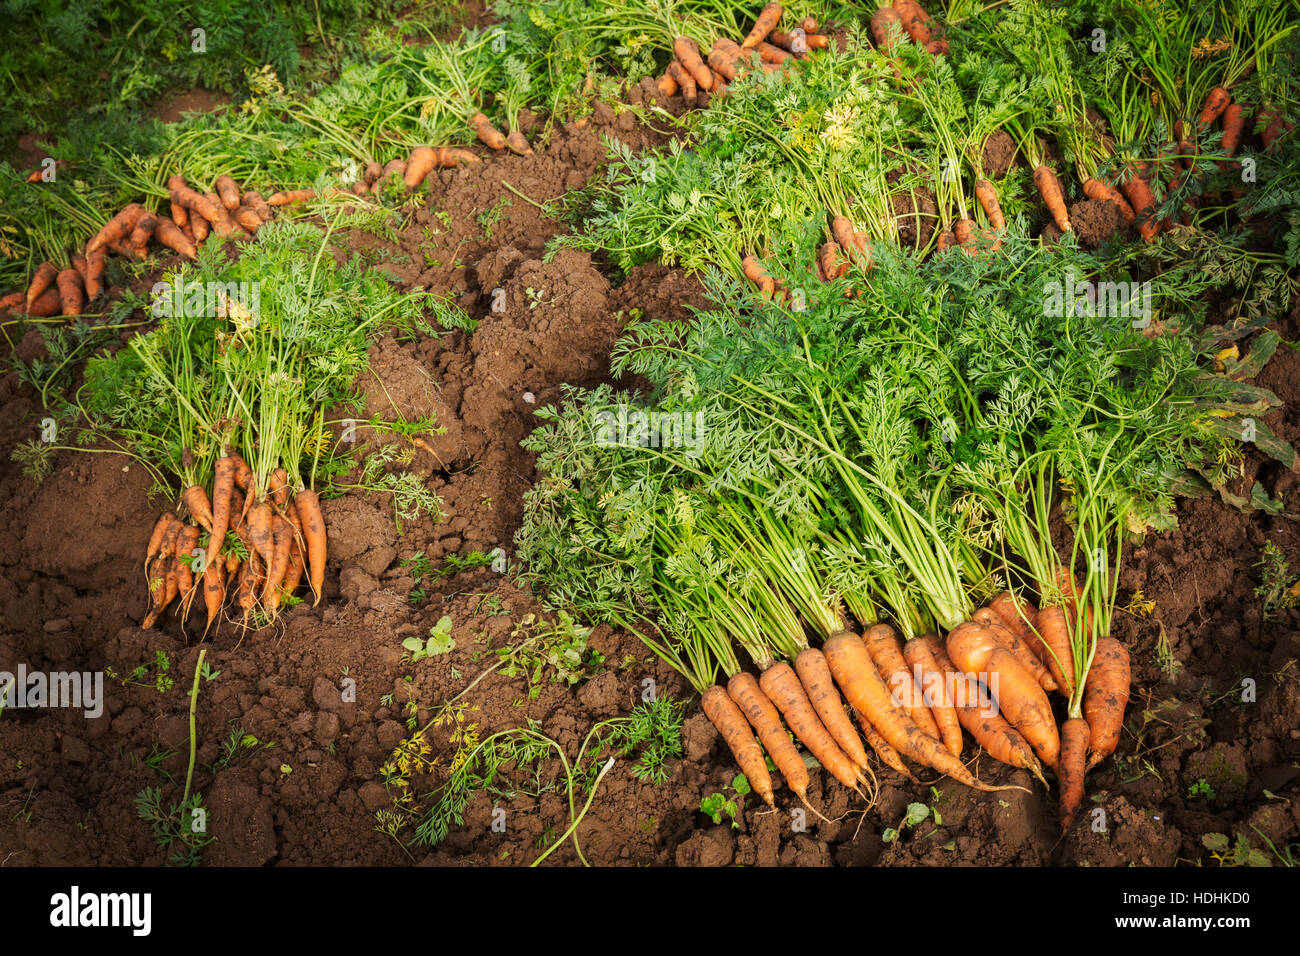 Rows of freshly pulled up carrots with green tops cleaned and laid on the soil Stock Photo